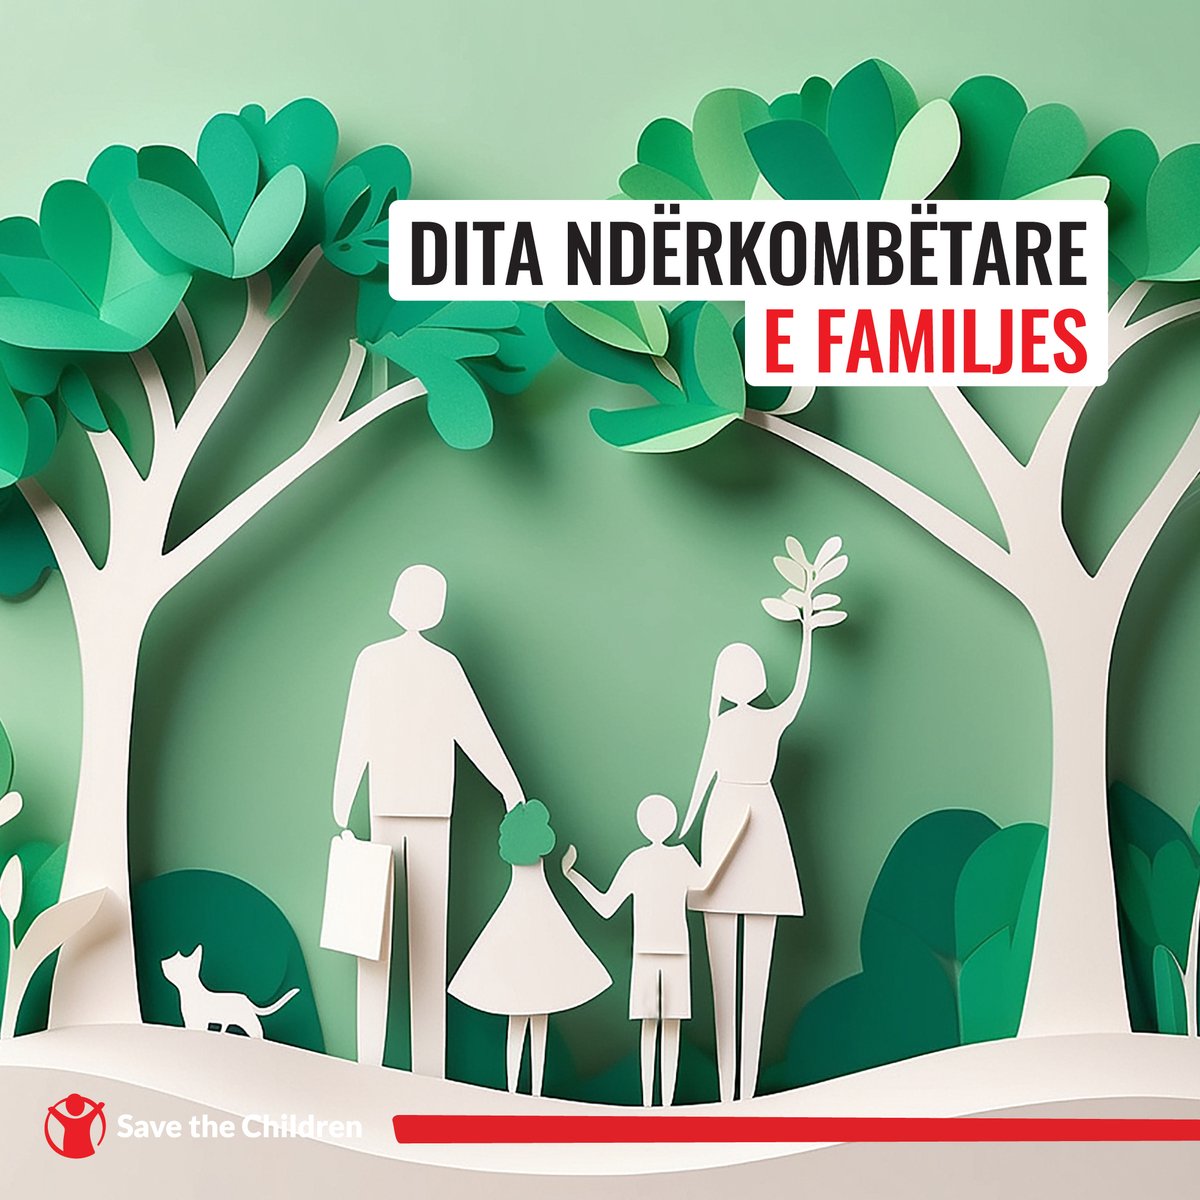 #Family is the source of love, respect, and support, building children's confidence to face life's challenges. Let's create a loving, non-violent environment for their bright future.  #InternationalFamilyDay